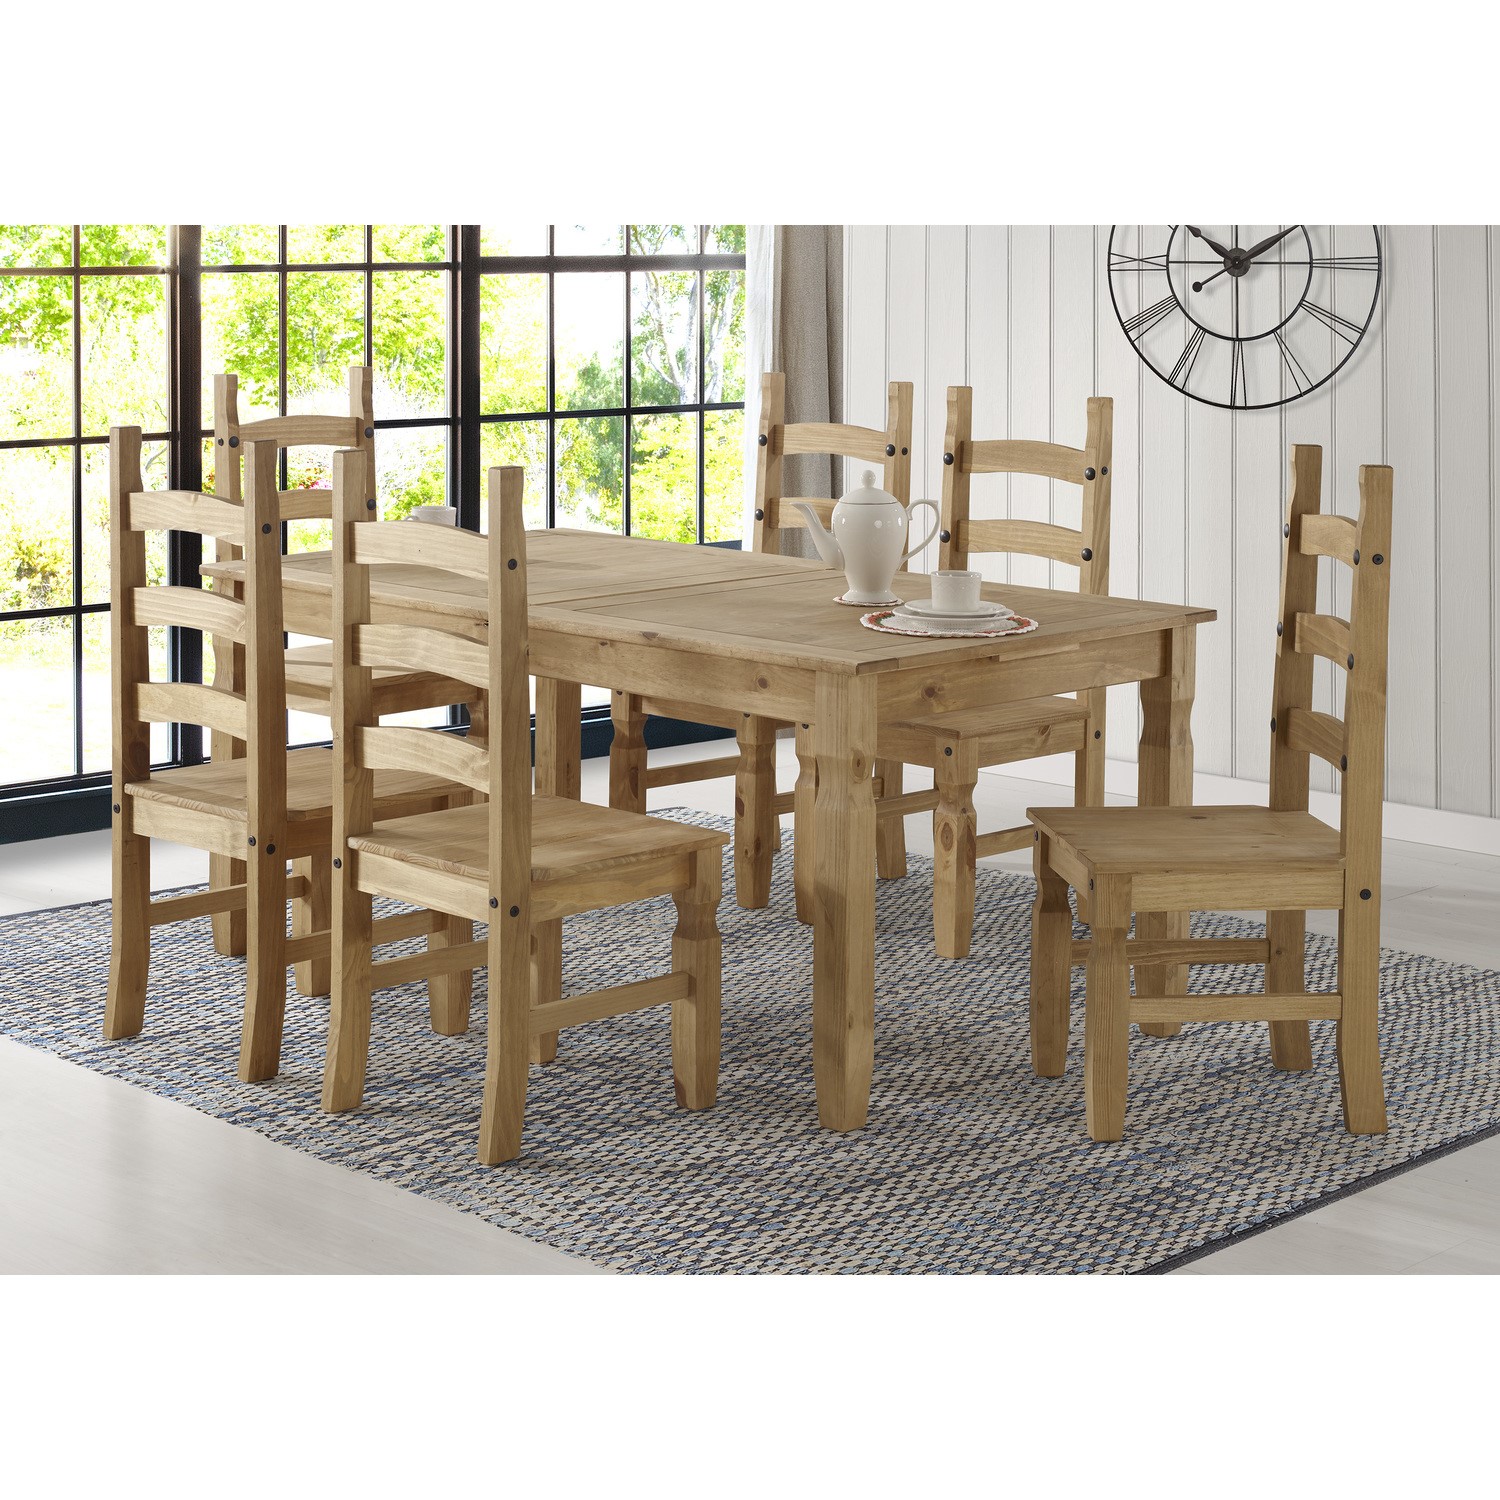 Corona Mexican Solid Pine Extendable Dining Table Set with 6 Di BUN ...